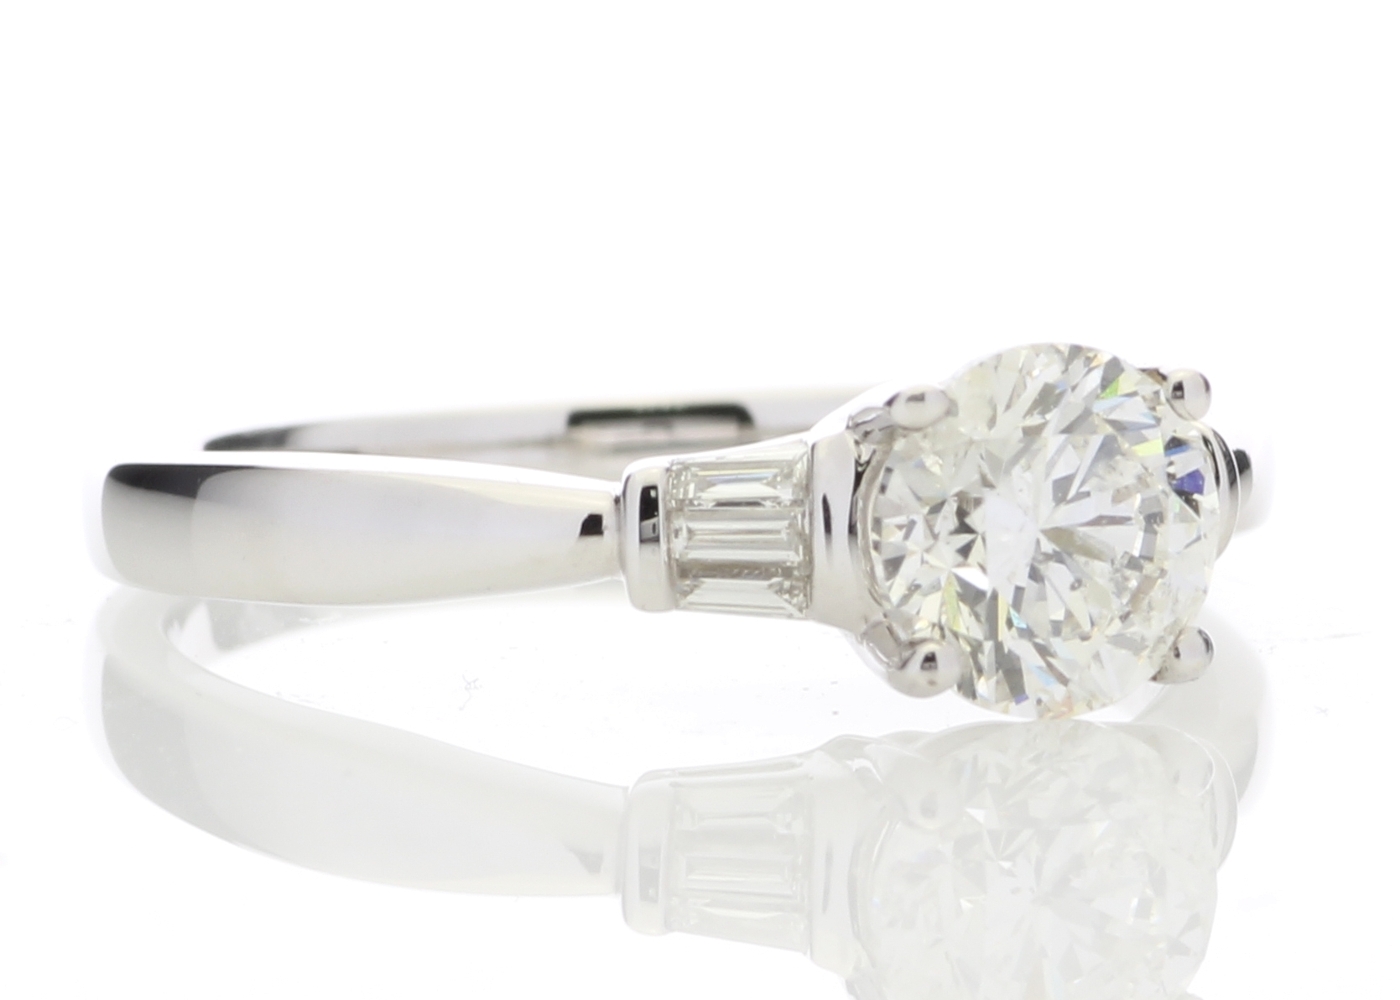 18ct White Gold Diamond Ring With Baguette 1.15 Carats - Image 4 of 5